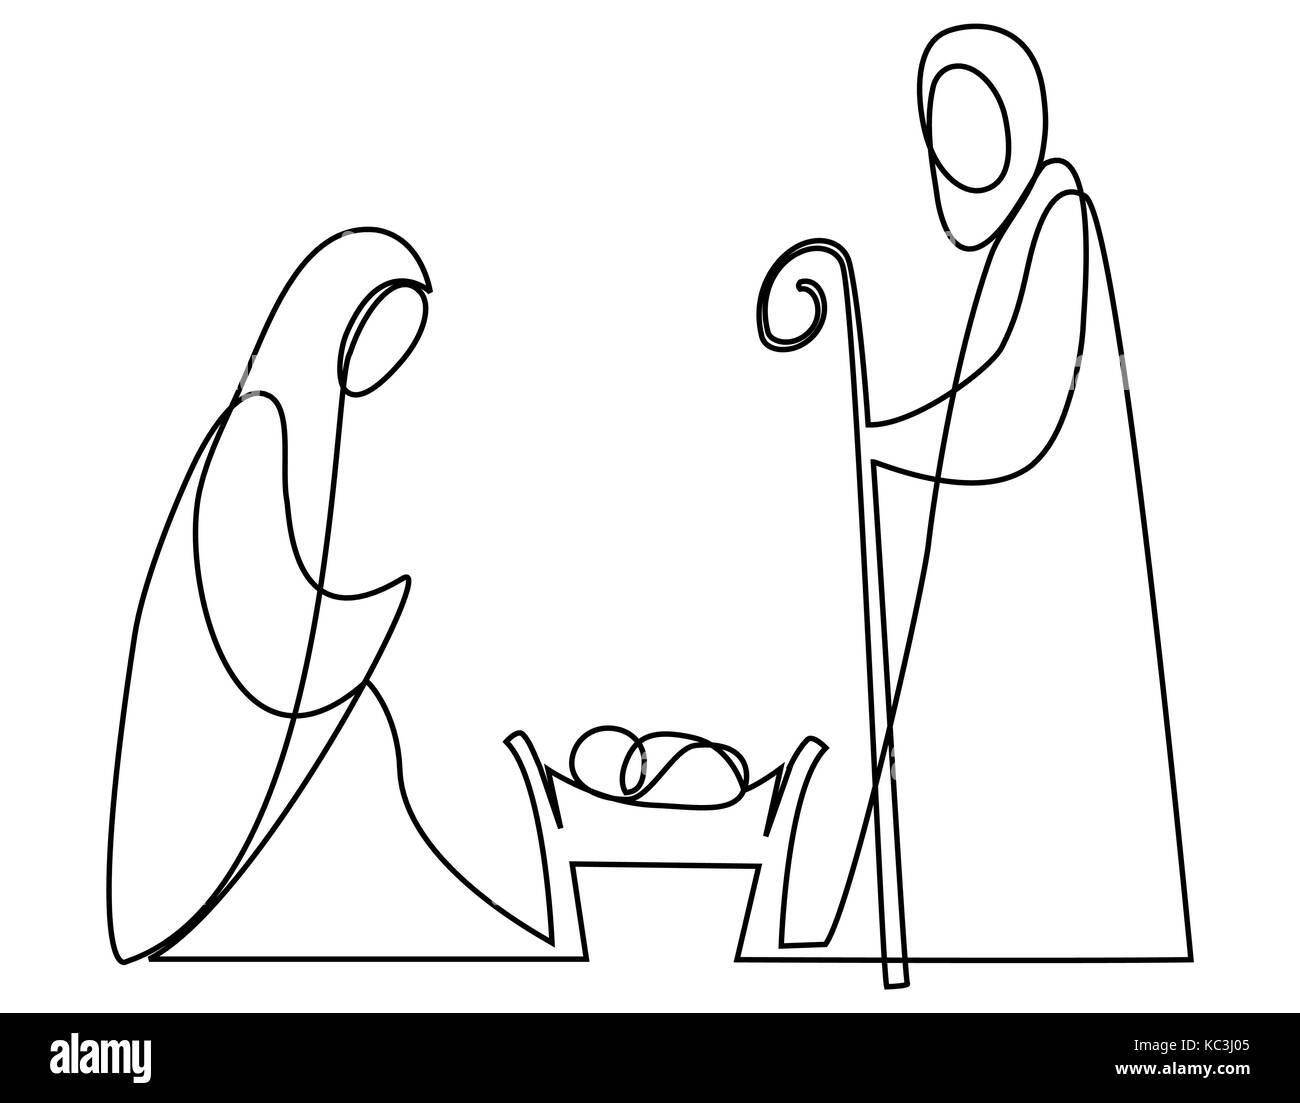 Nativity scene with Holy Family one line drawing Stock Vector Image